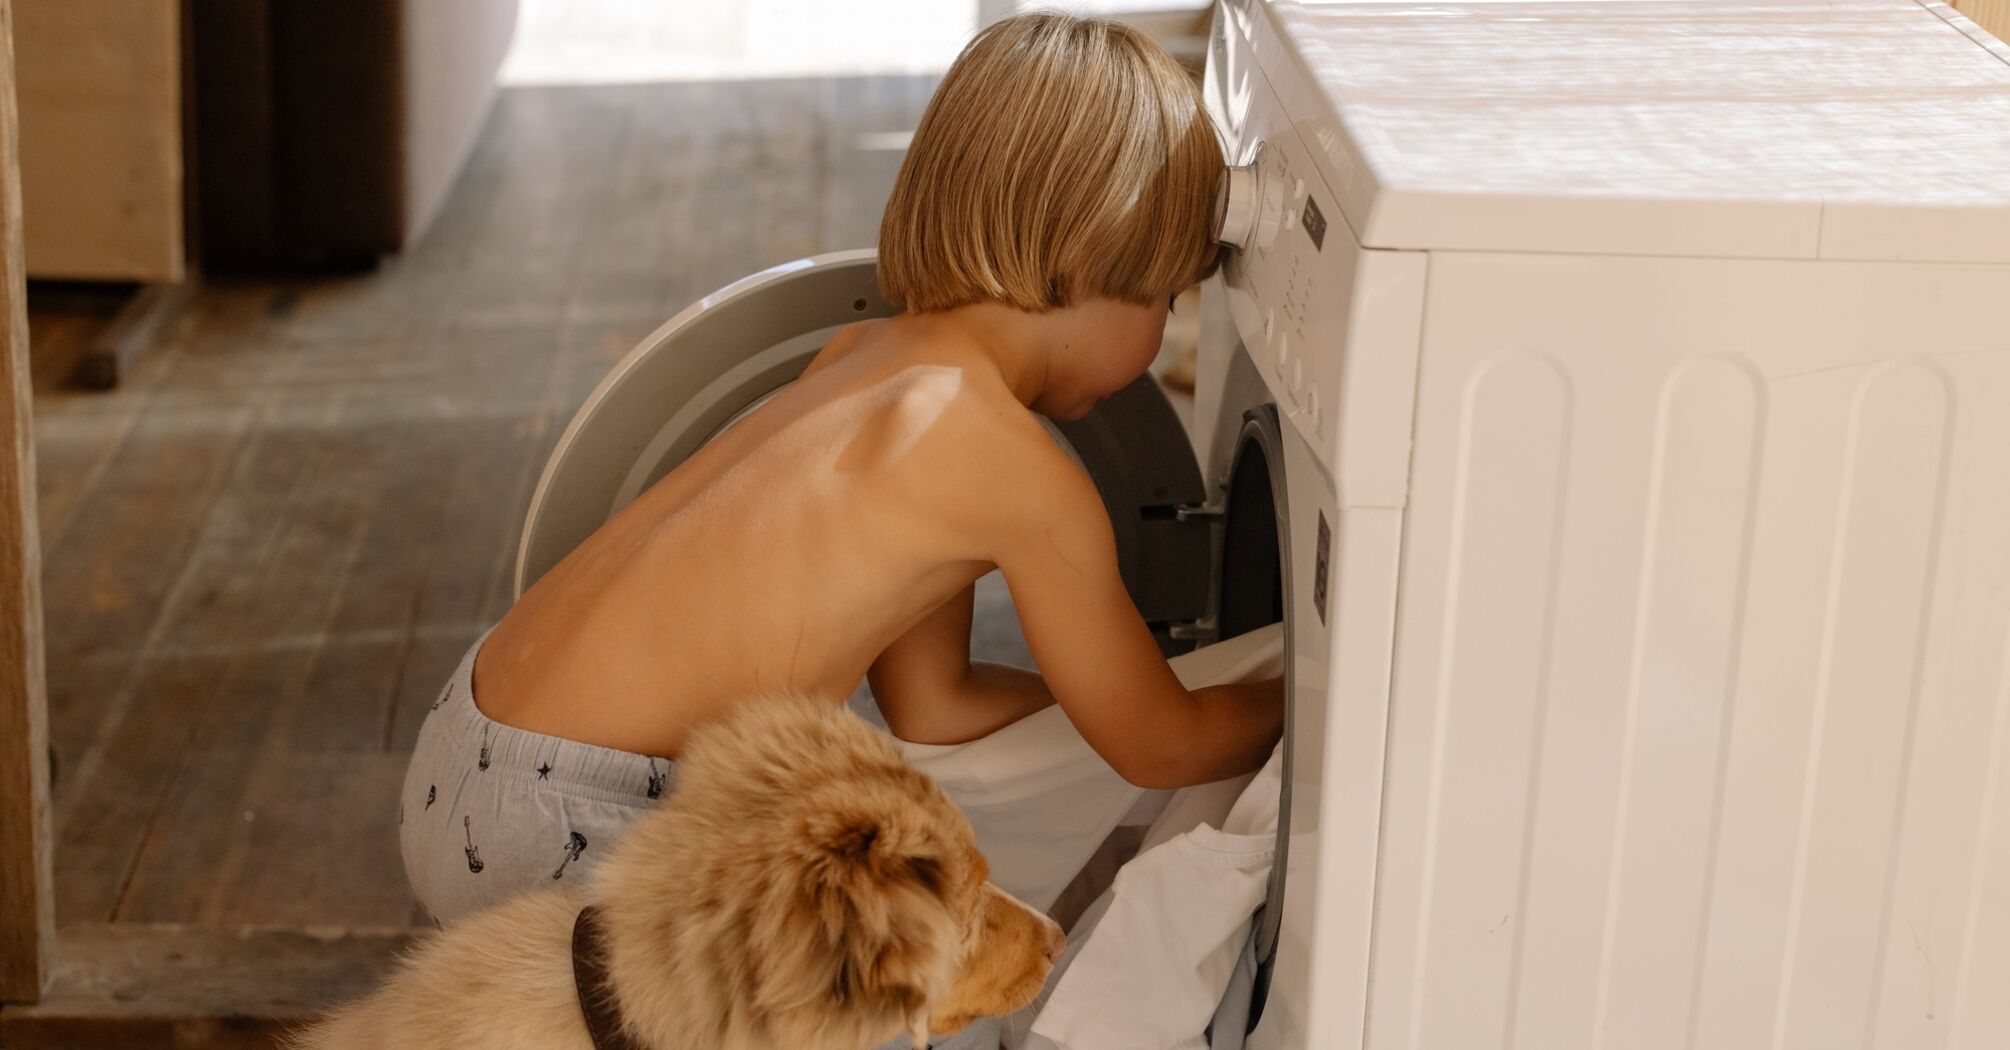 7 unusual things that can be washed in the washing machine